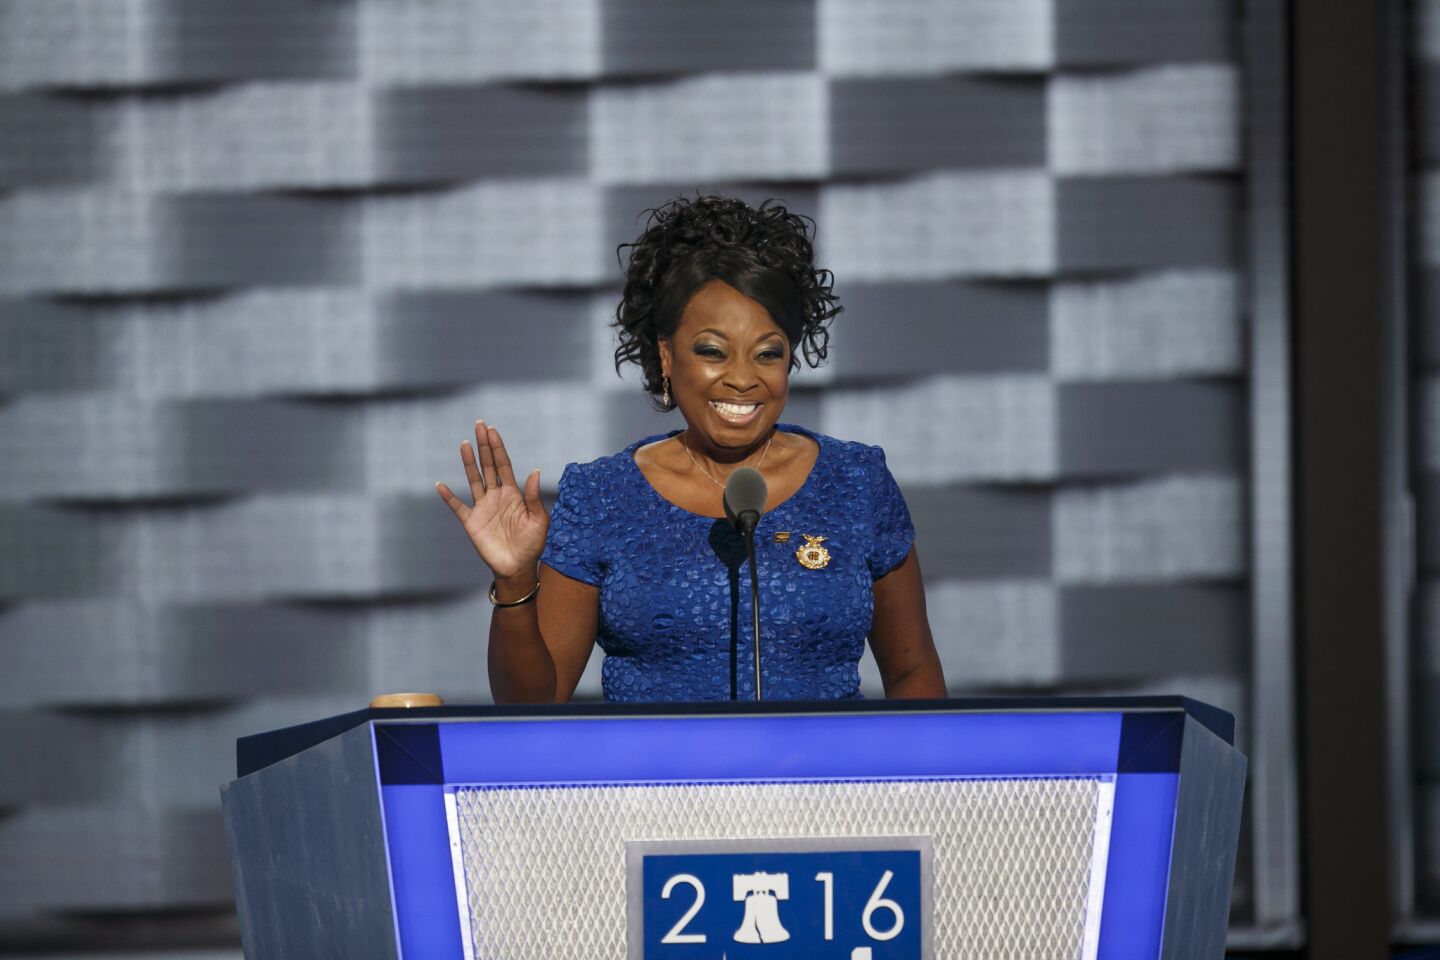 Actress Star Jones waves at the 2016 Democratic National Convention in Philadelphia.